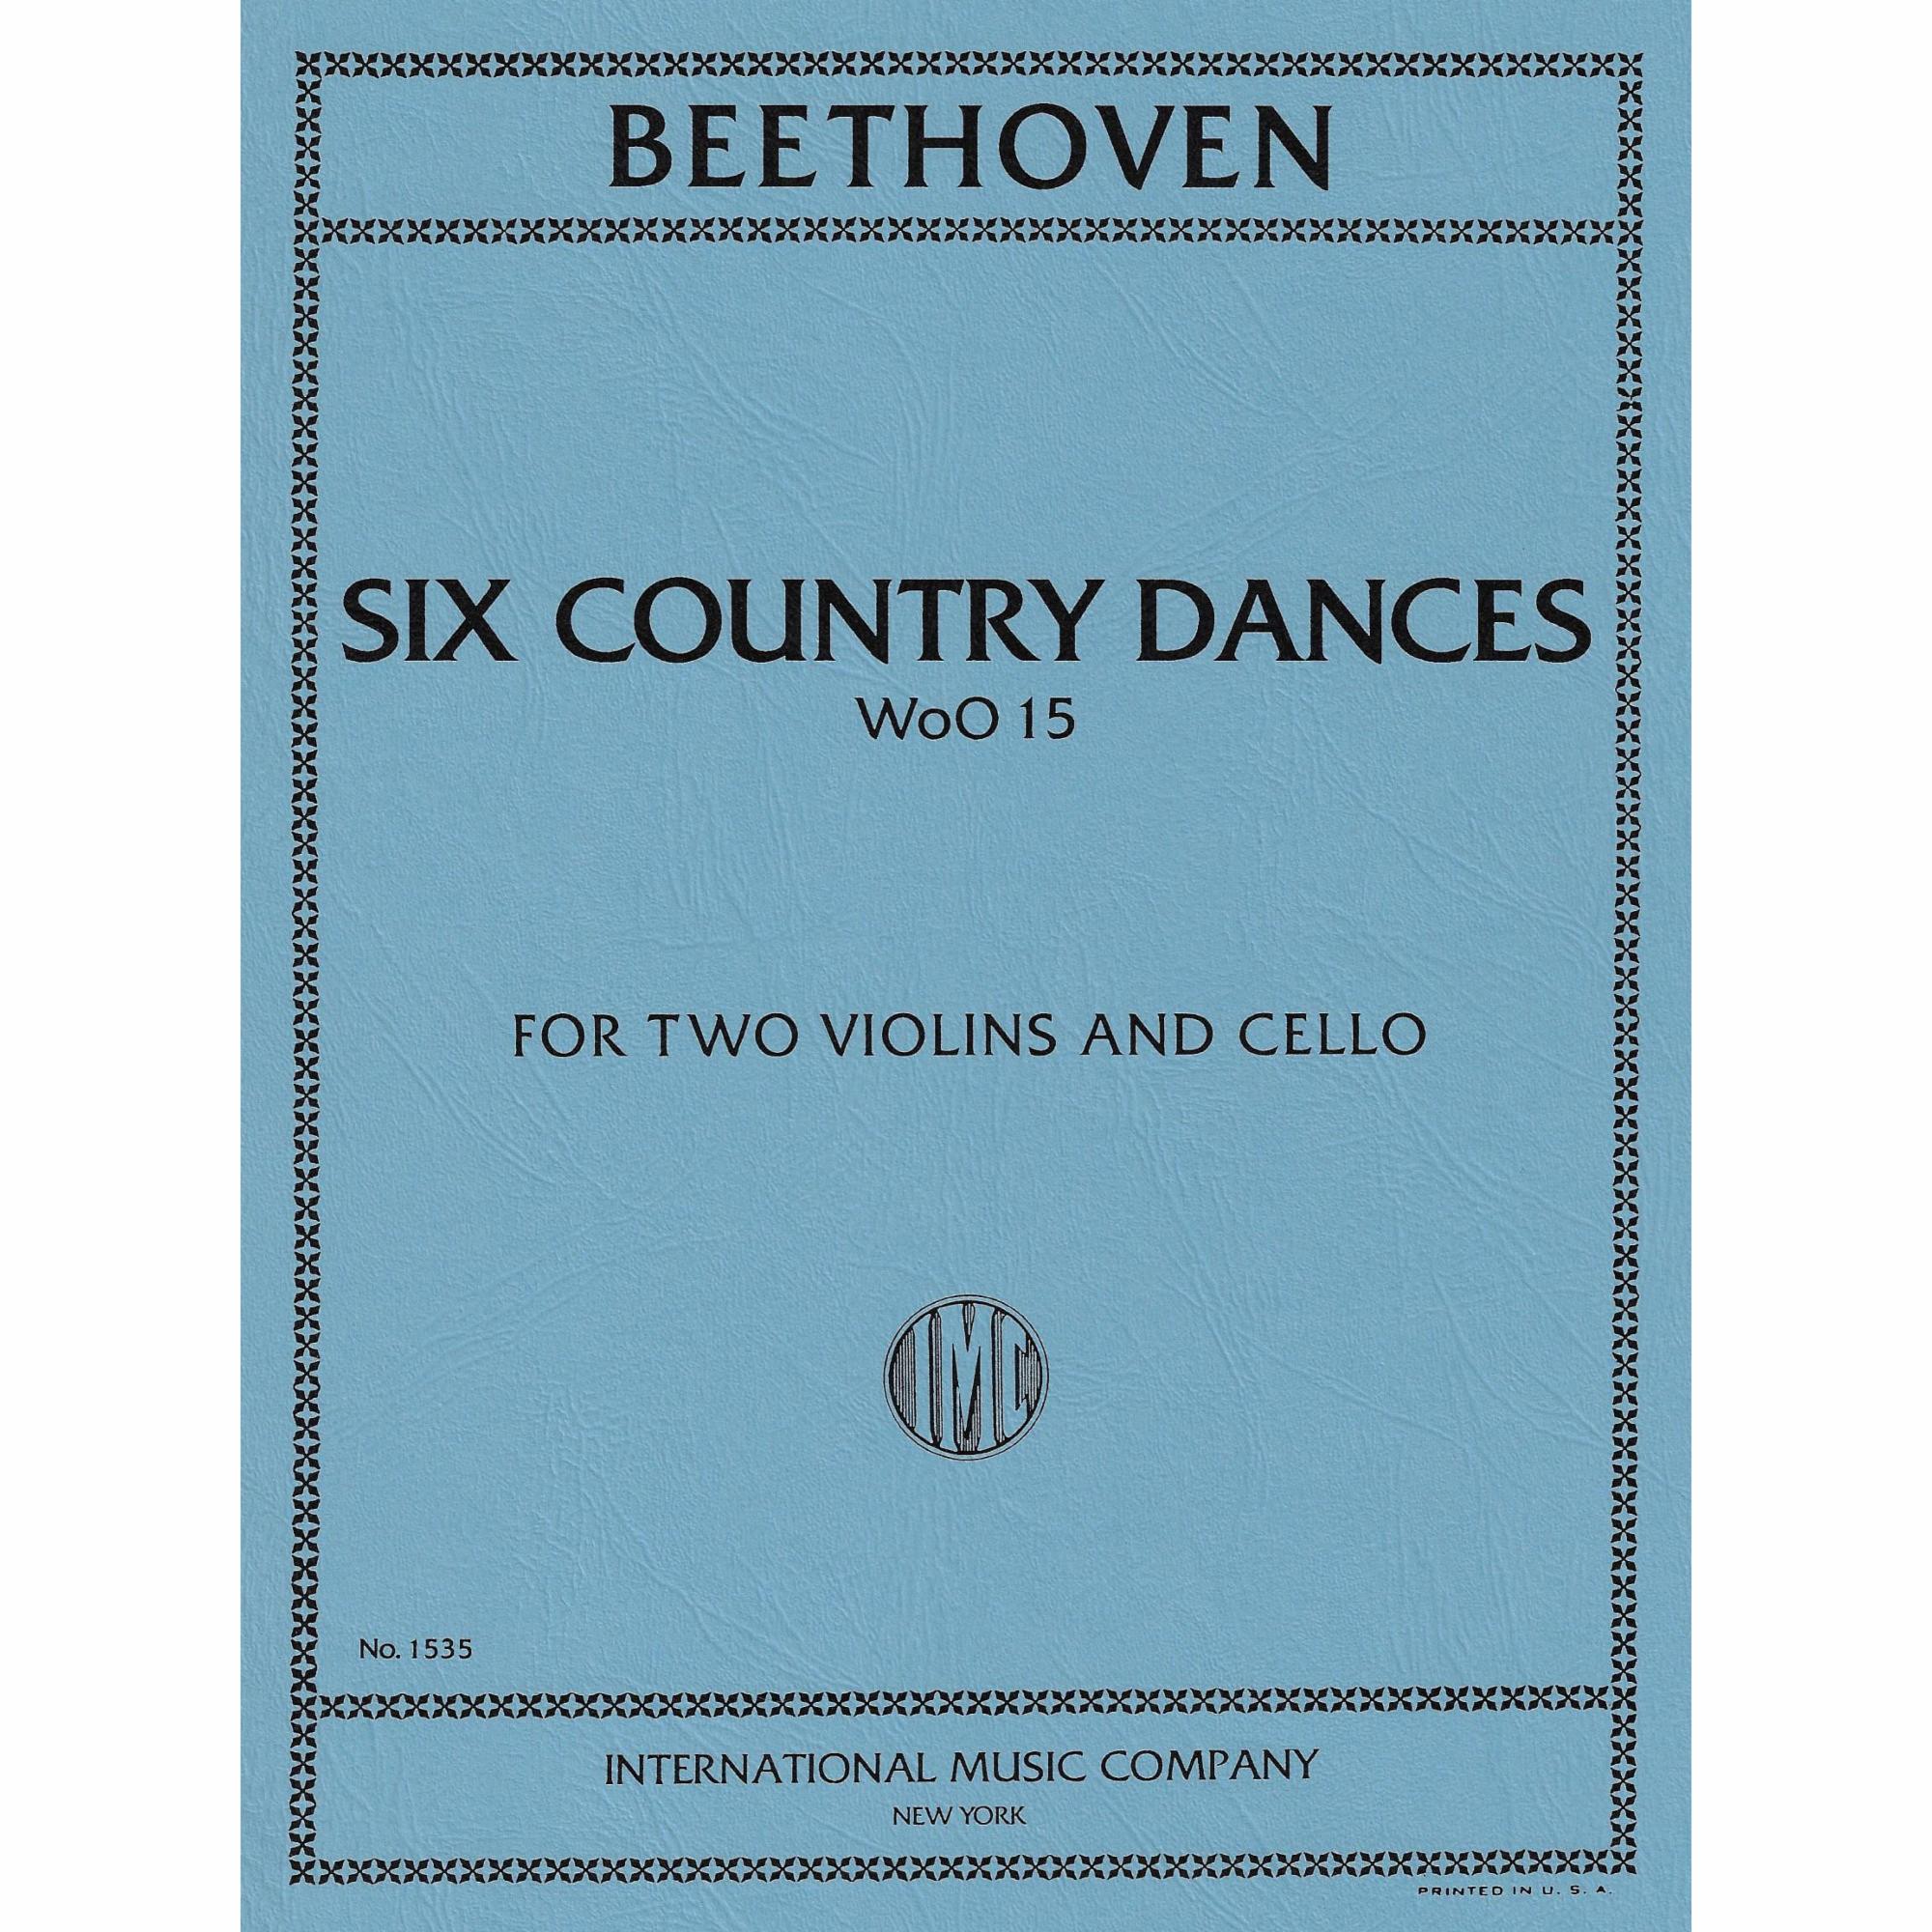 Beethoven -- Six Country Dances, WoO 15 for Two Violins and Cello